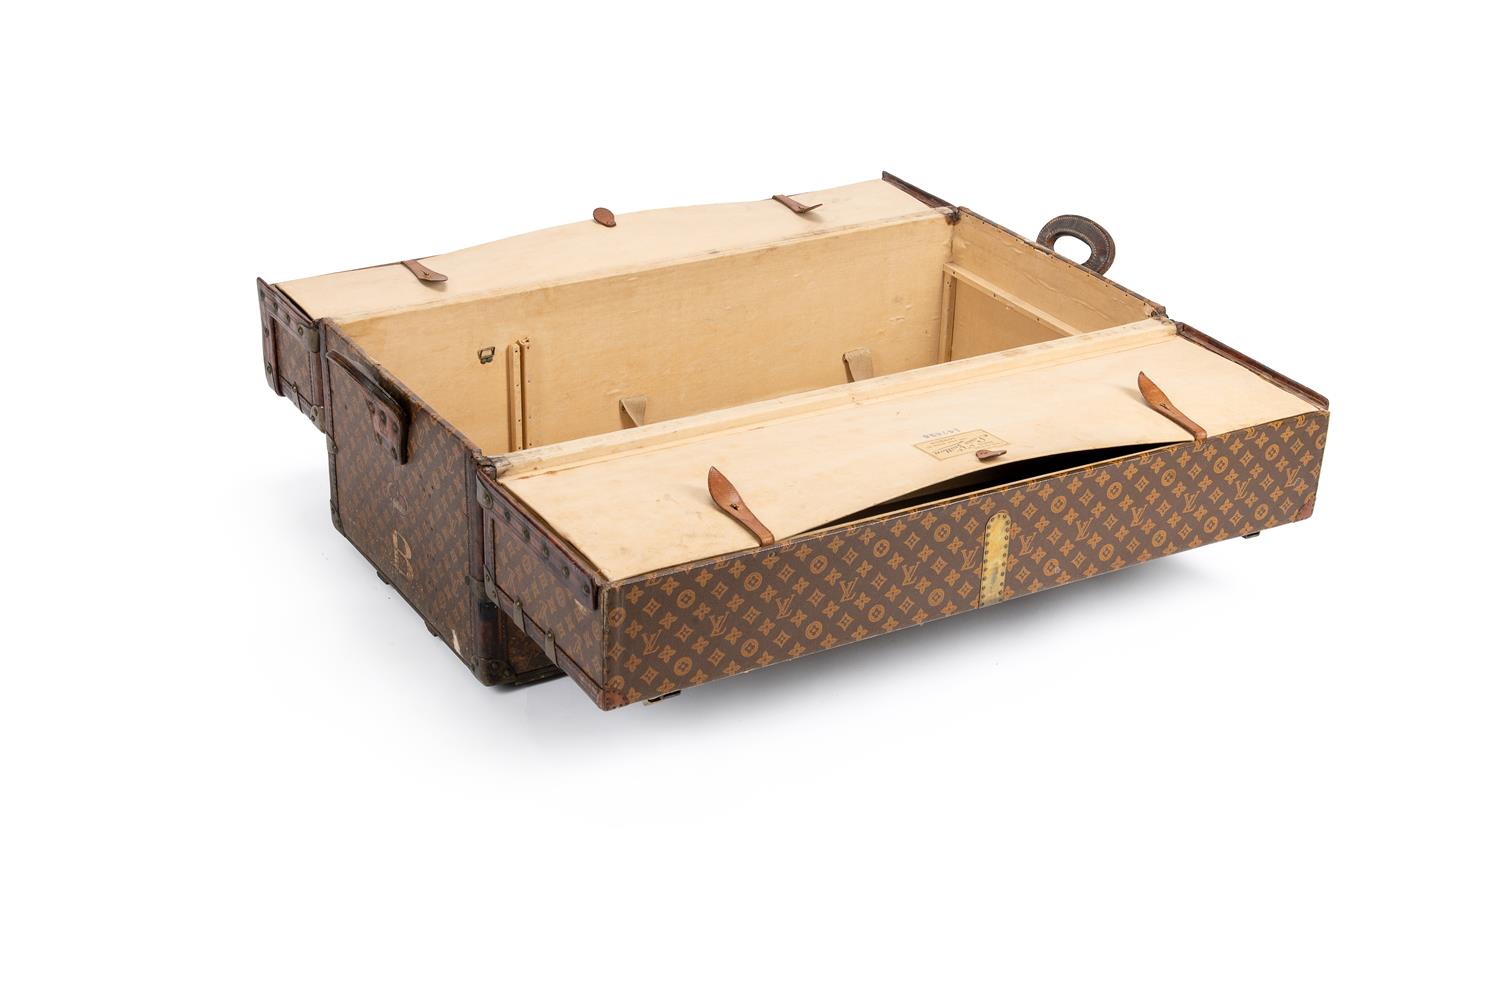 LOUIS VUITTON, A MONOGRAMMED COATED CANVAS HARD TRAVELLING TRUNK - Image 2 of 4